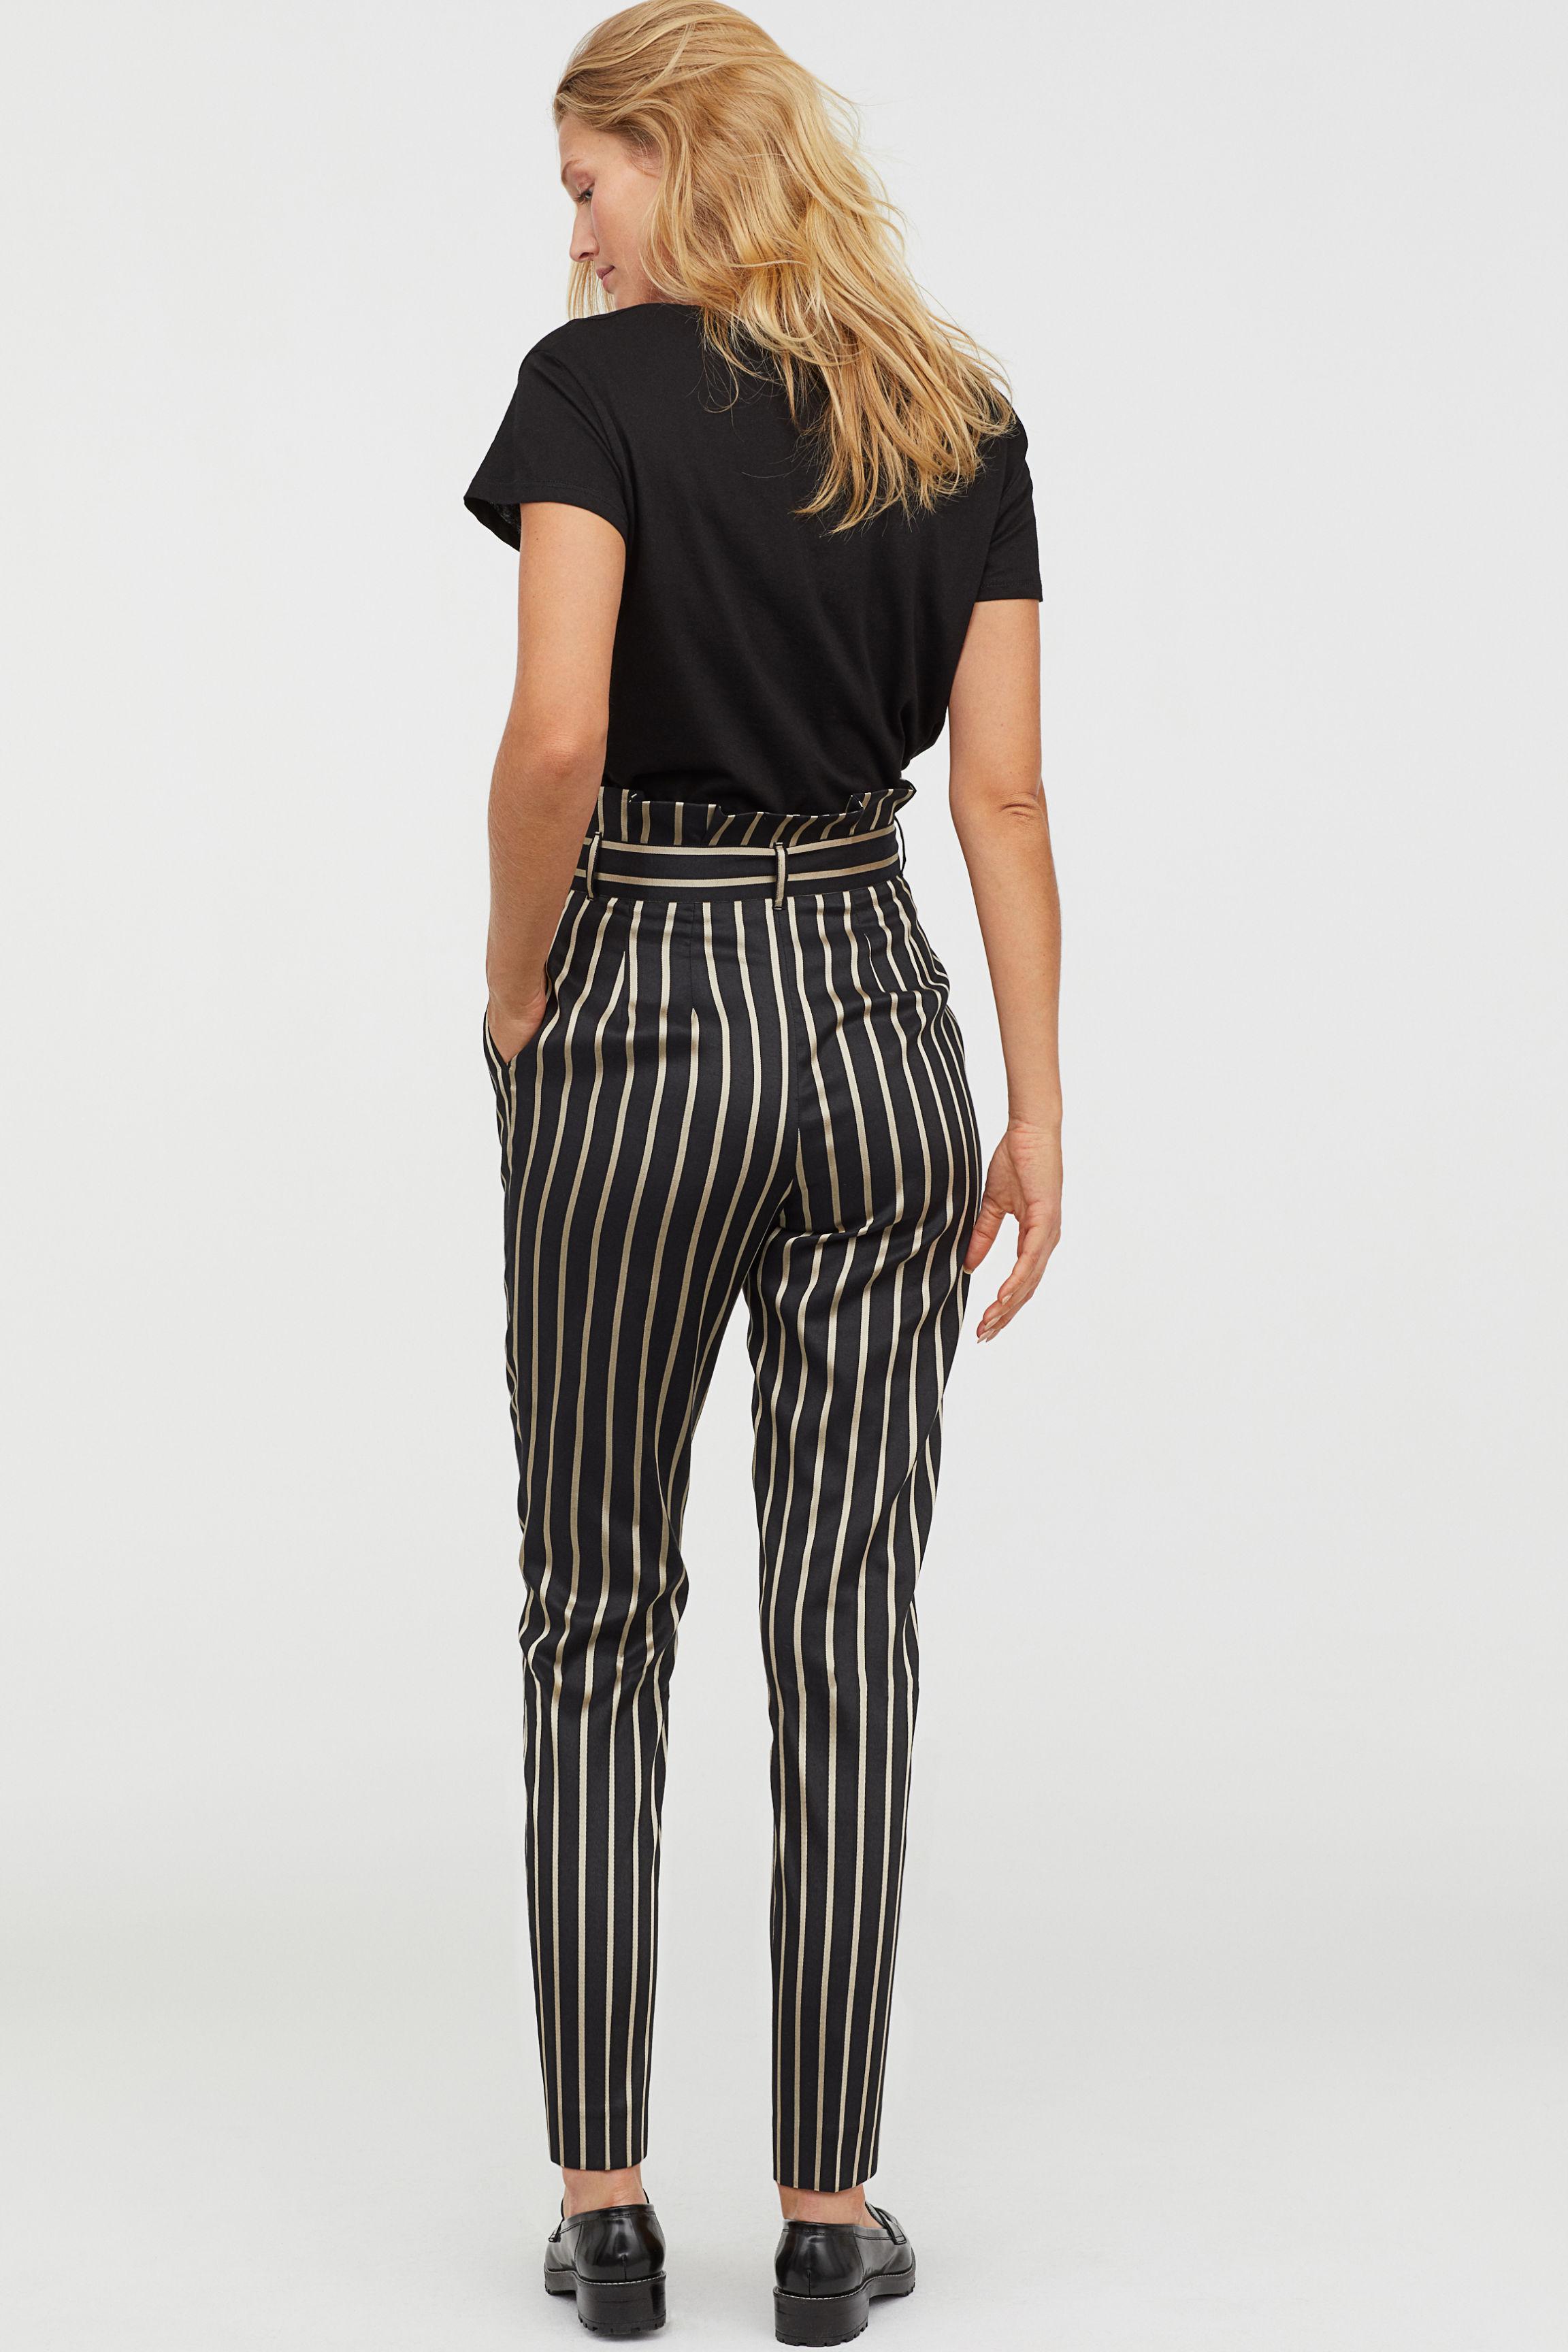 H&M Synthetic Paper-bag Pants in Black - Lyst